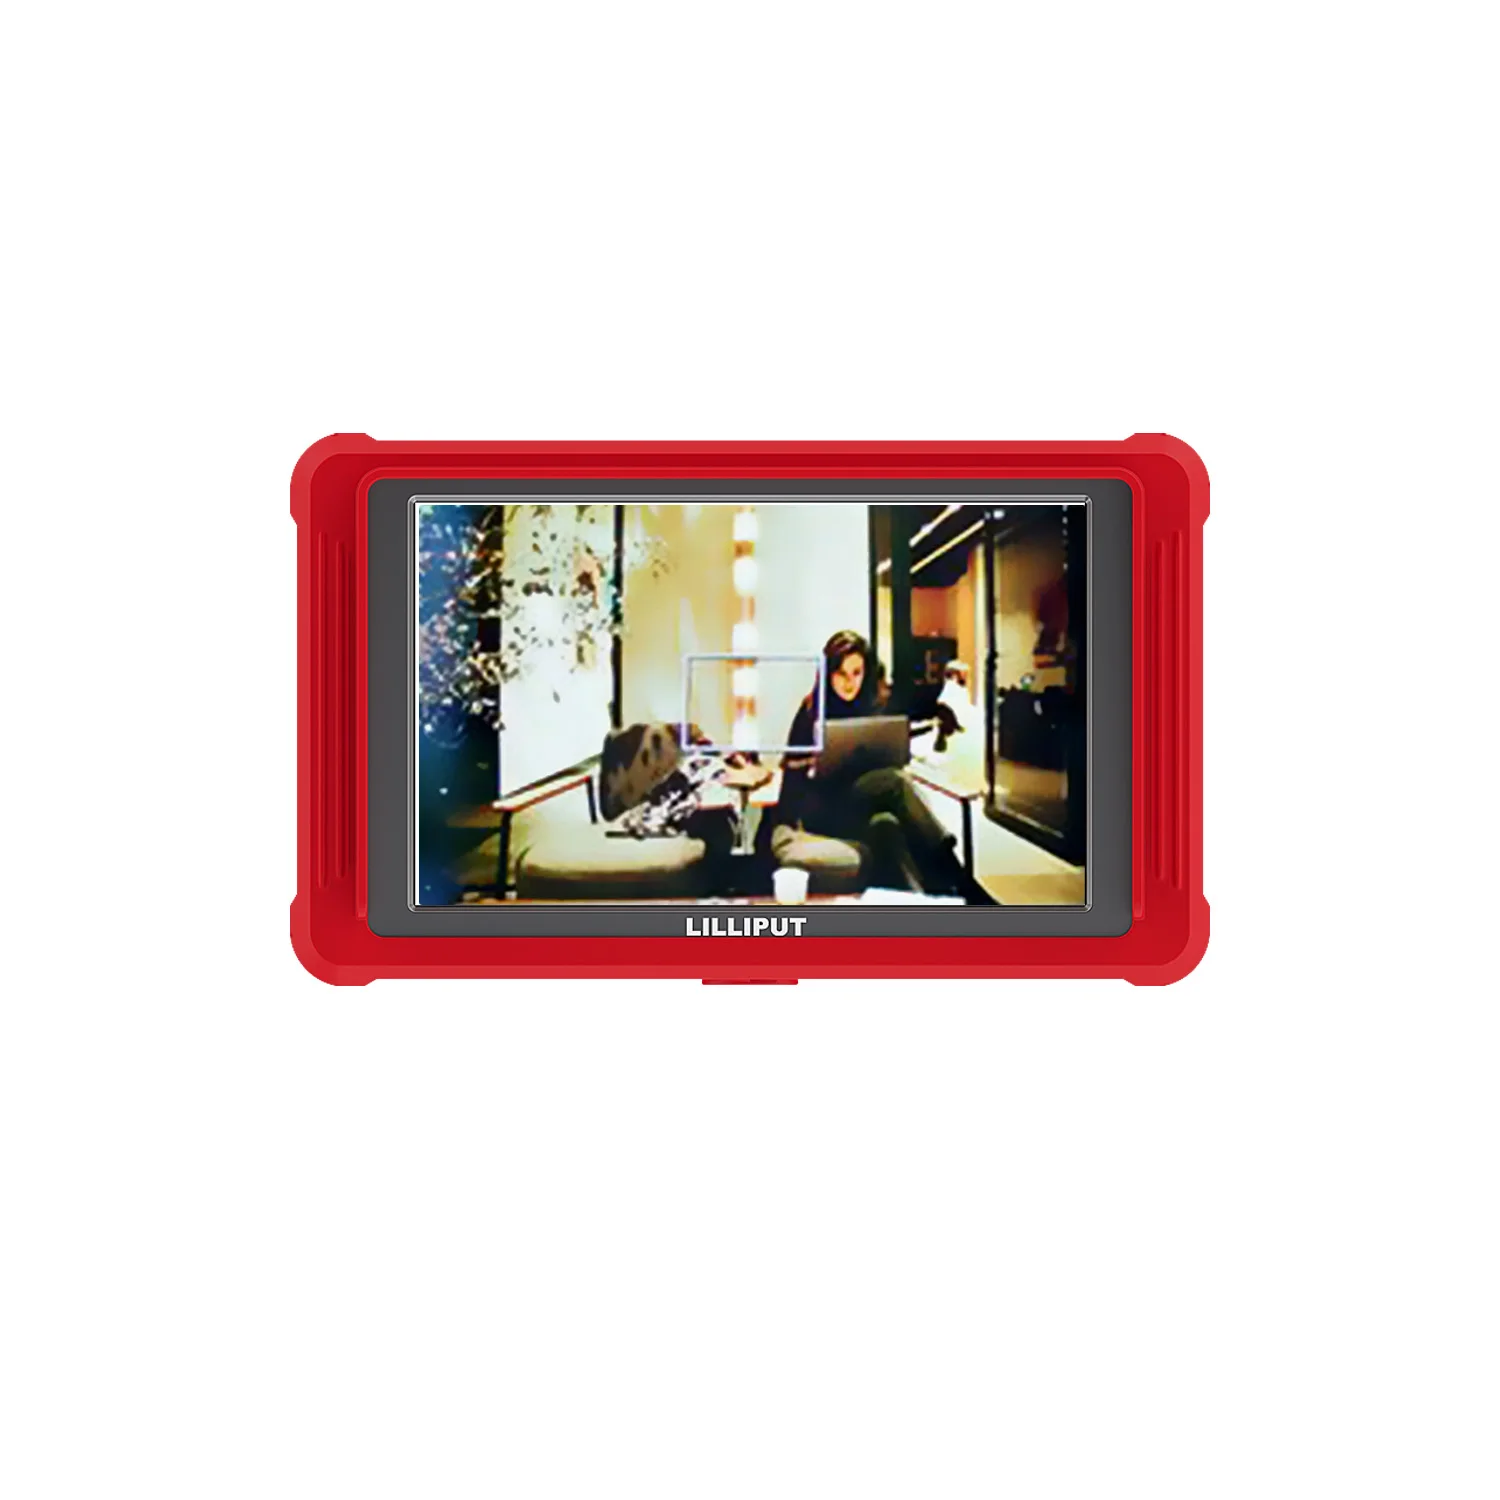 LILLIPUT 5.4 inch HDMI 2.0 3G SDI on camera monitor for camcorder&DSLR Application for taking photos& making movies